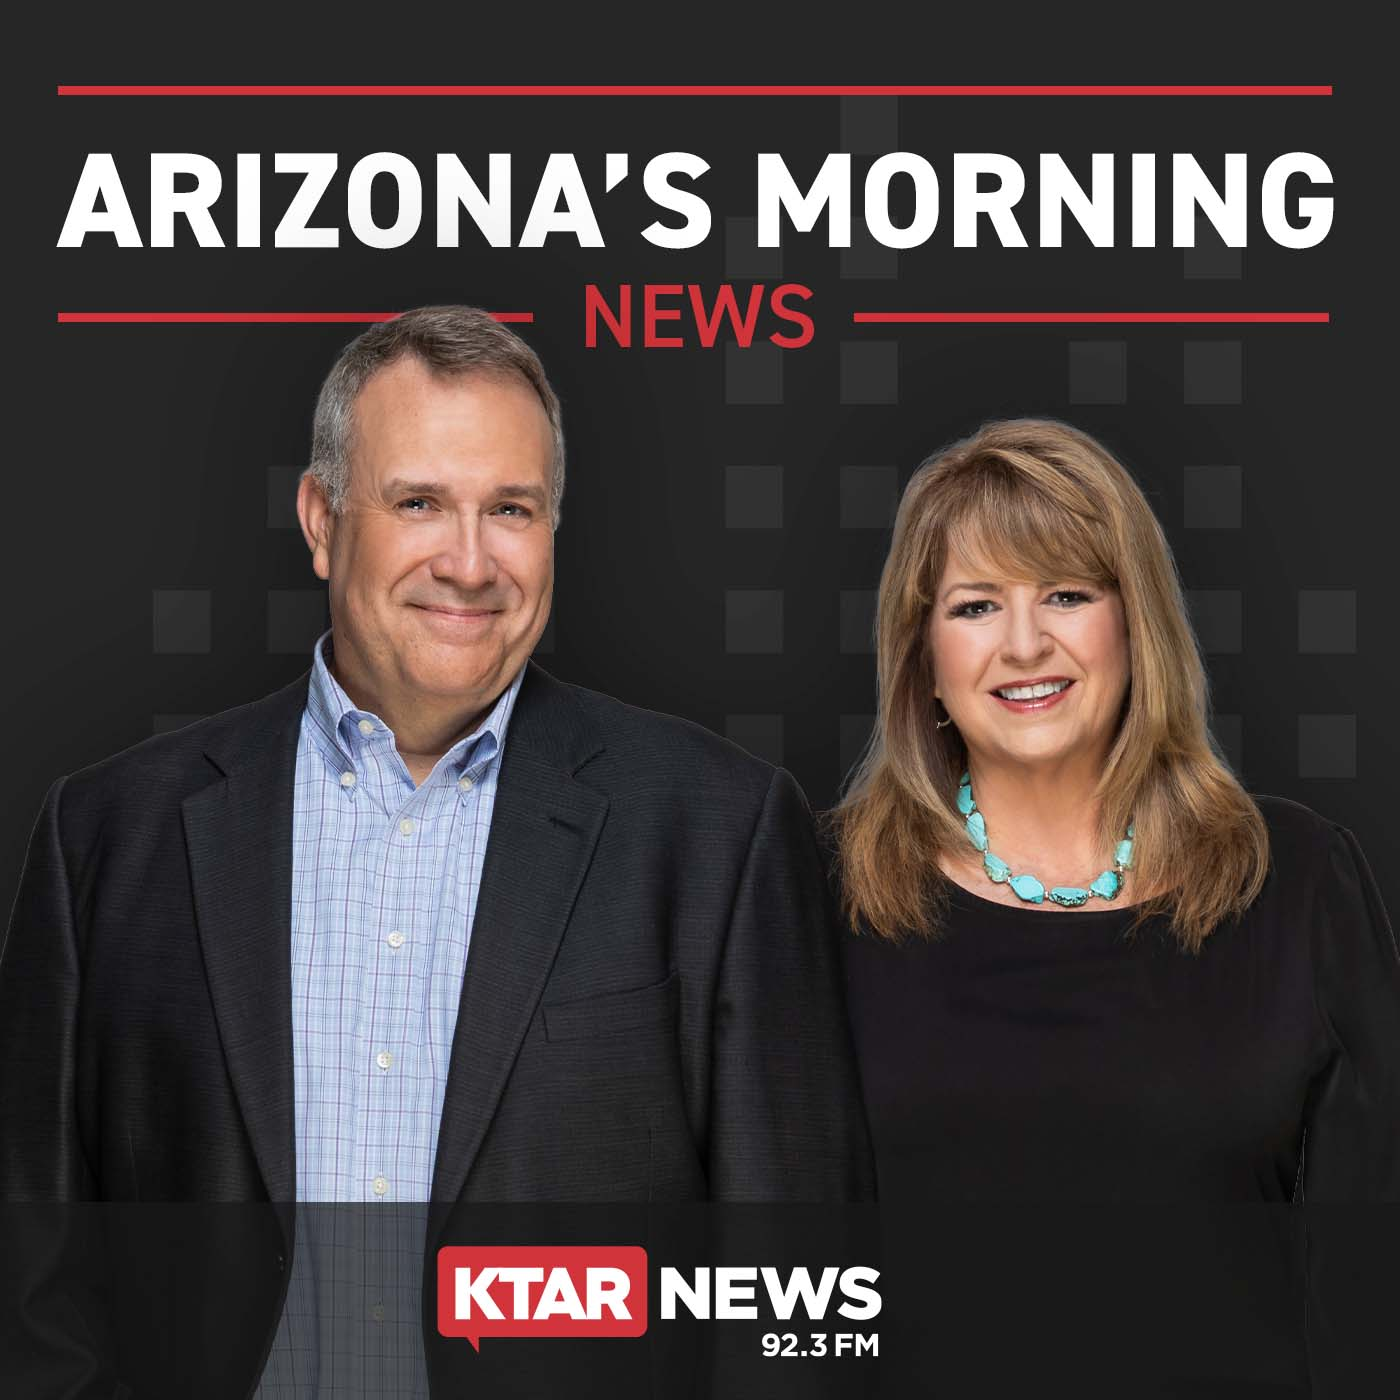 Jim's SharperPoint Commentary: The GOP's future is decided in Arizona